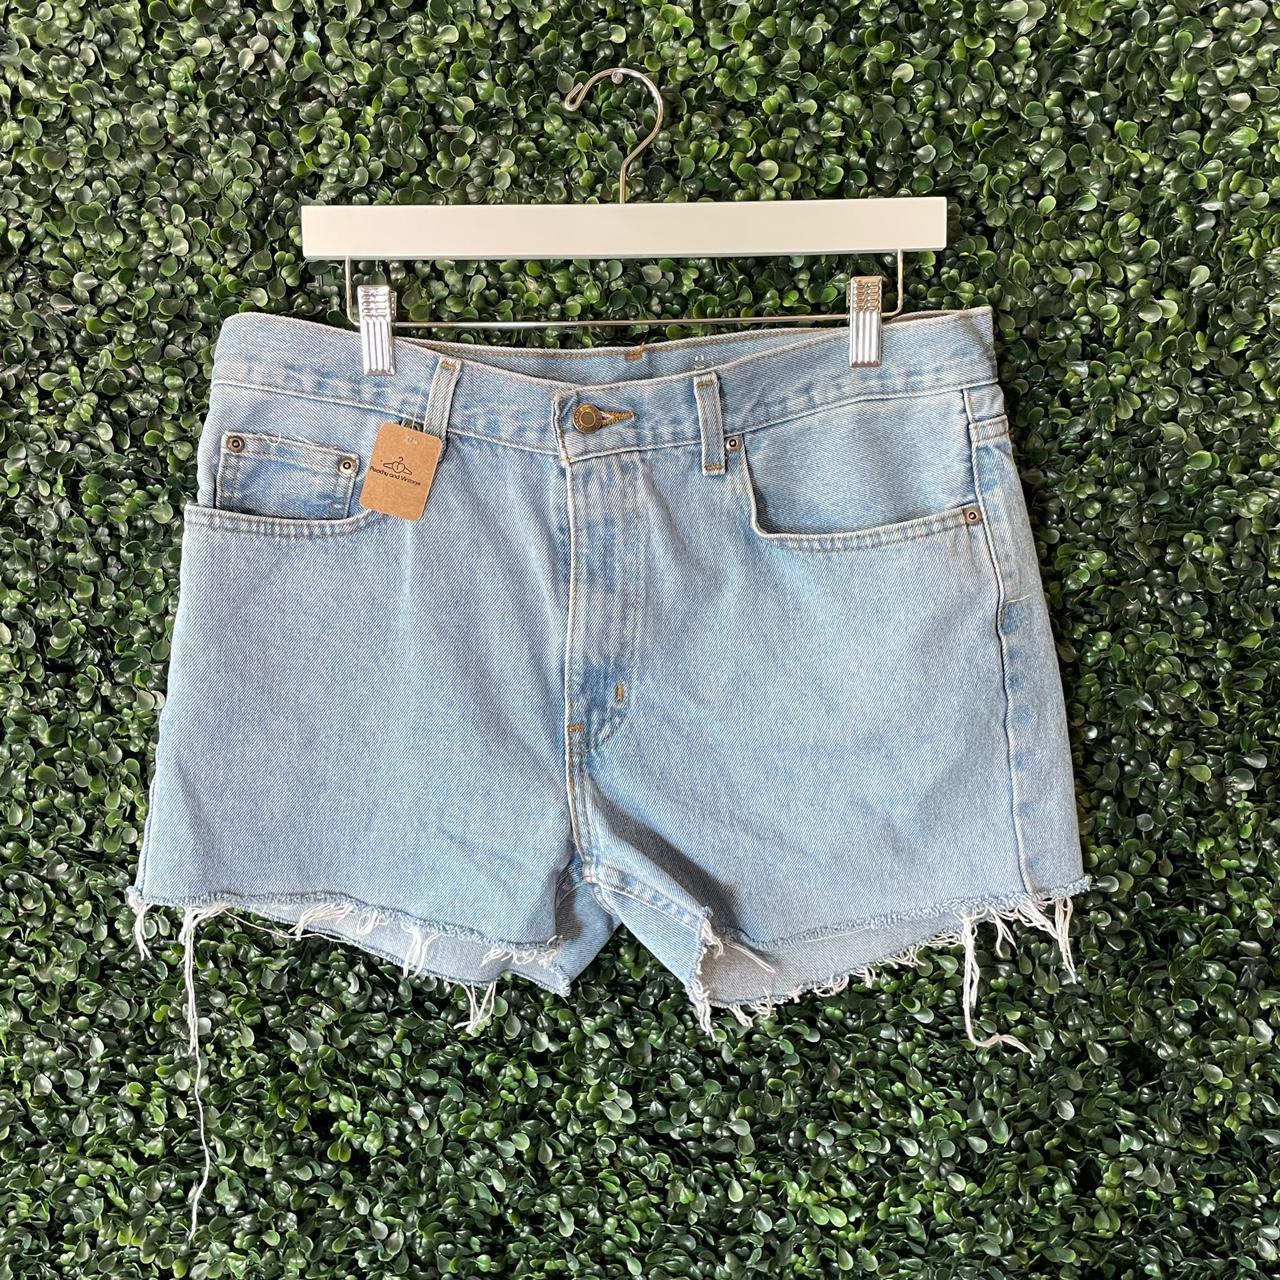 Vintage high waisted cutoff shorts These light... - Depop